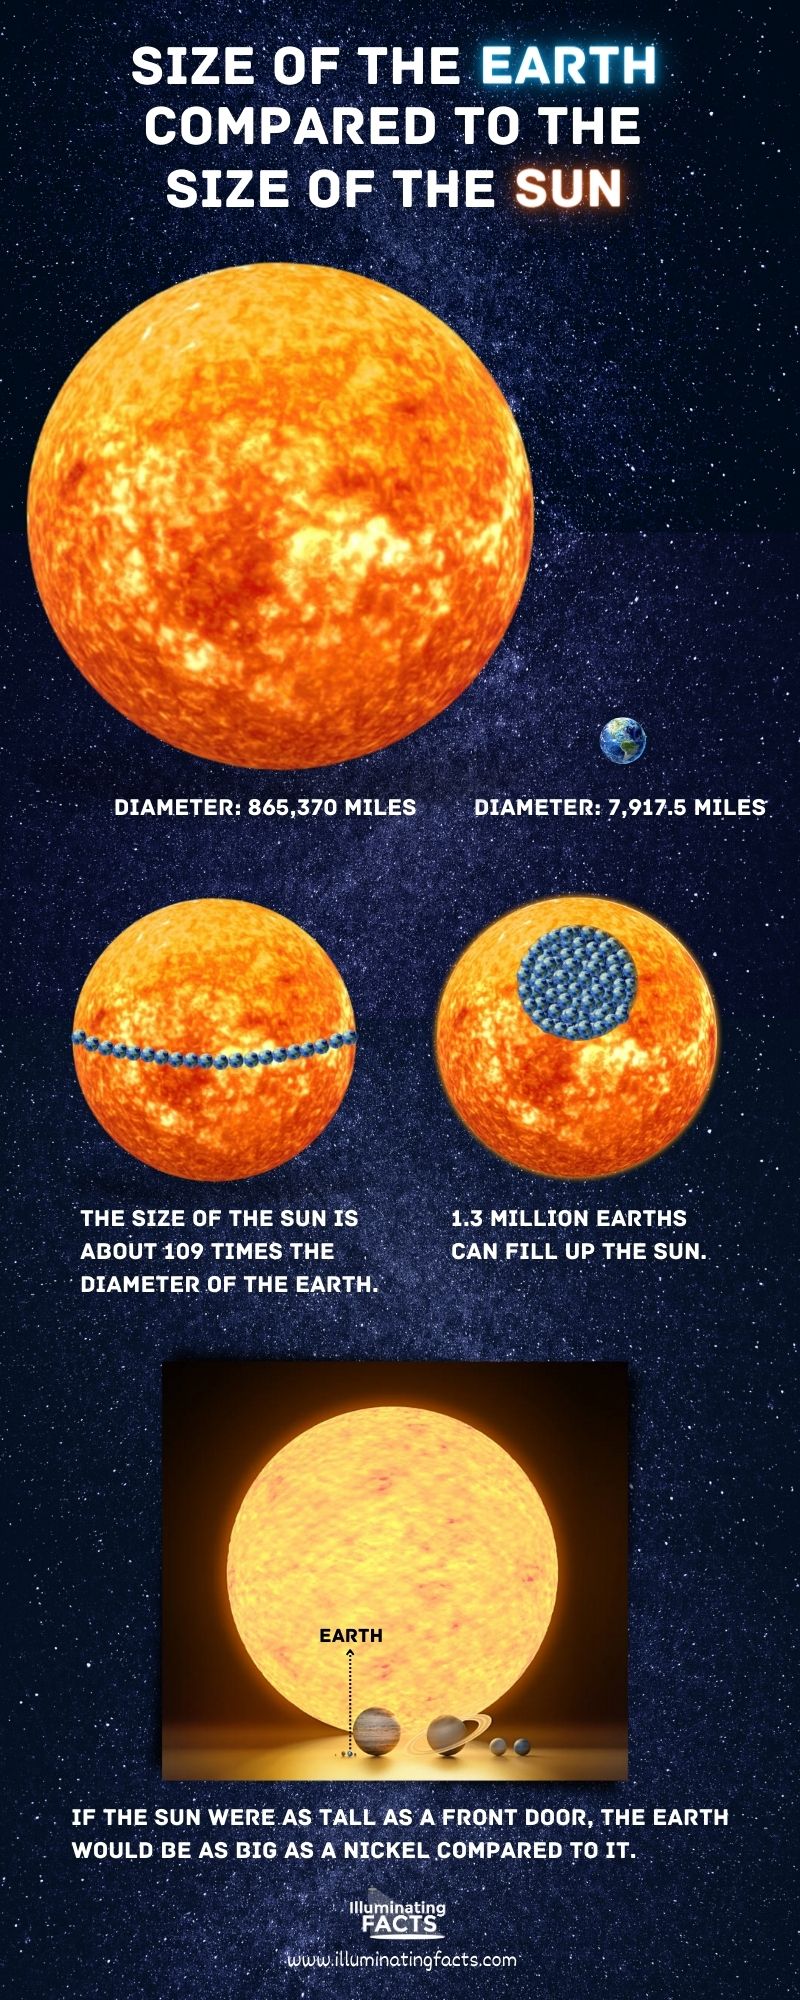 Size of the Earth Compared to the Size of the Sun